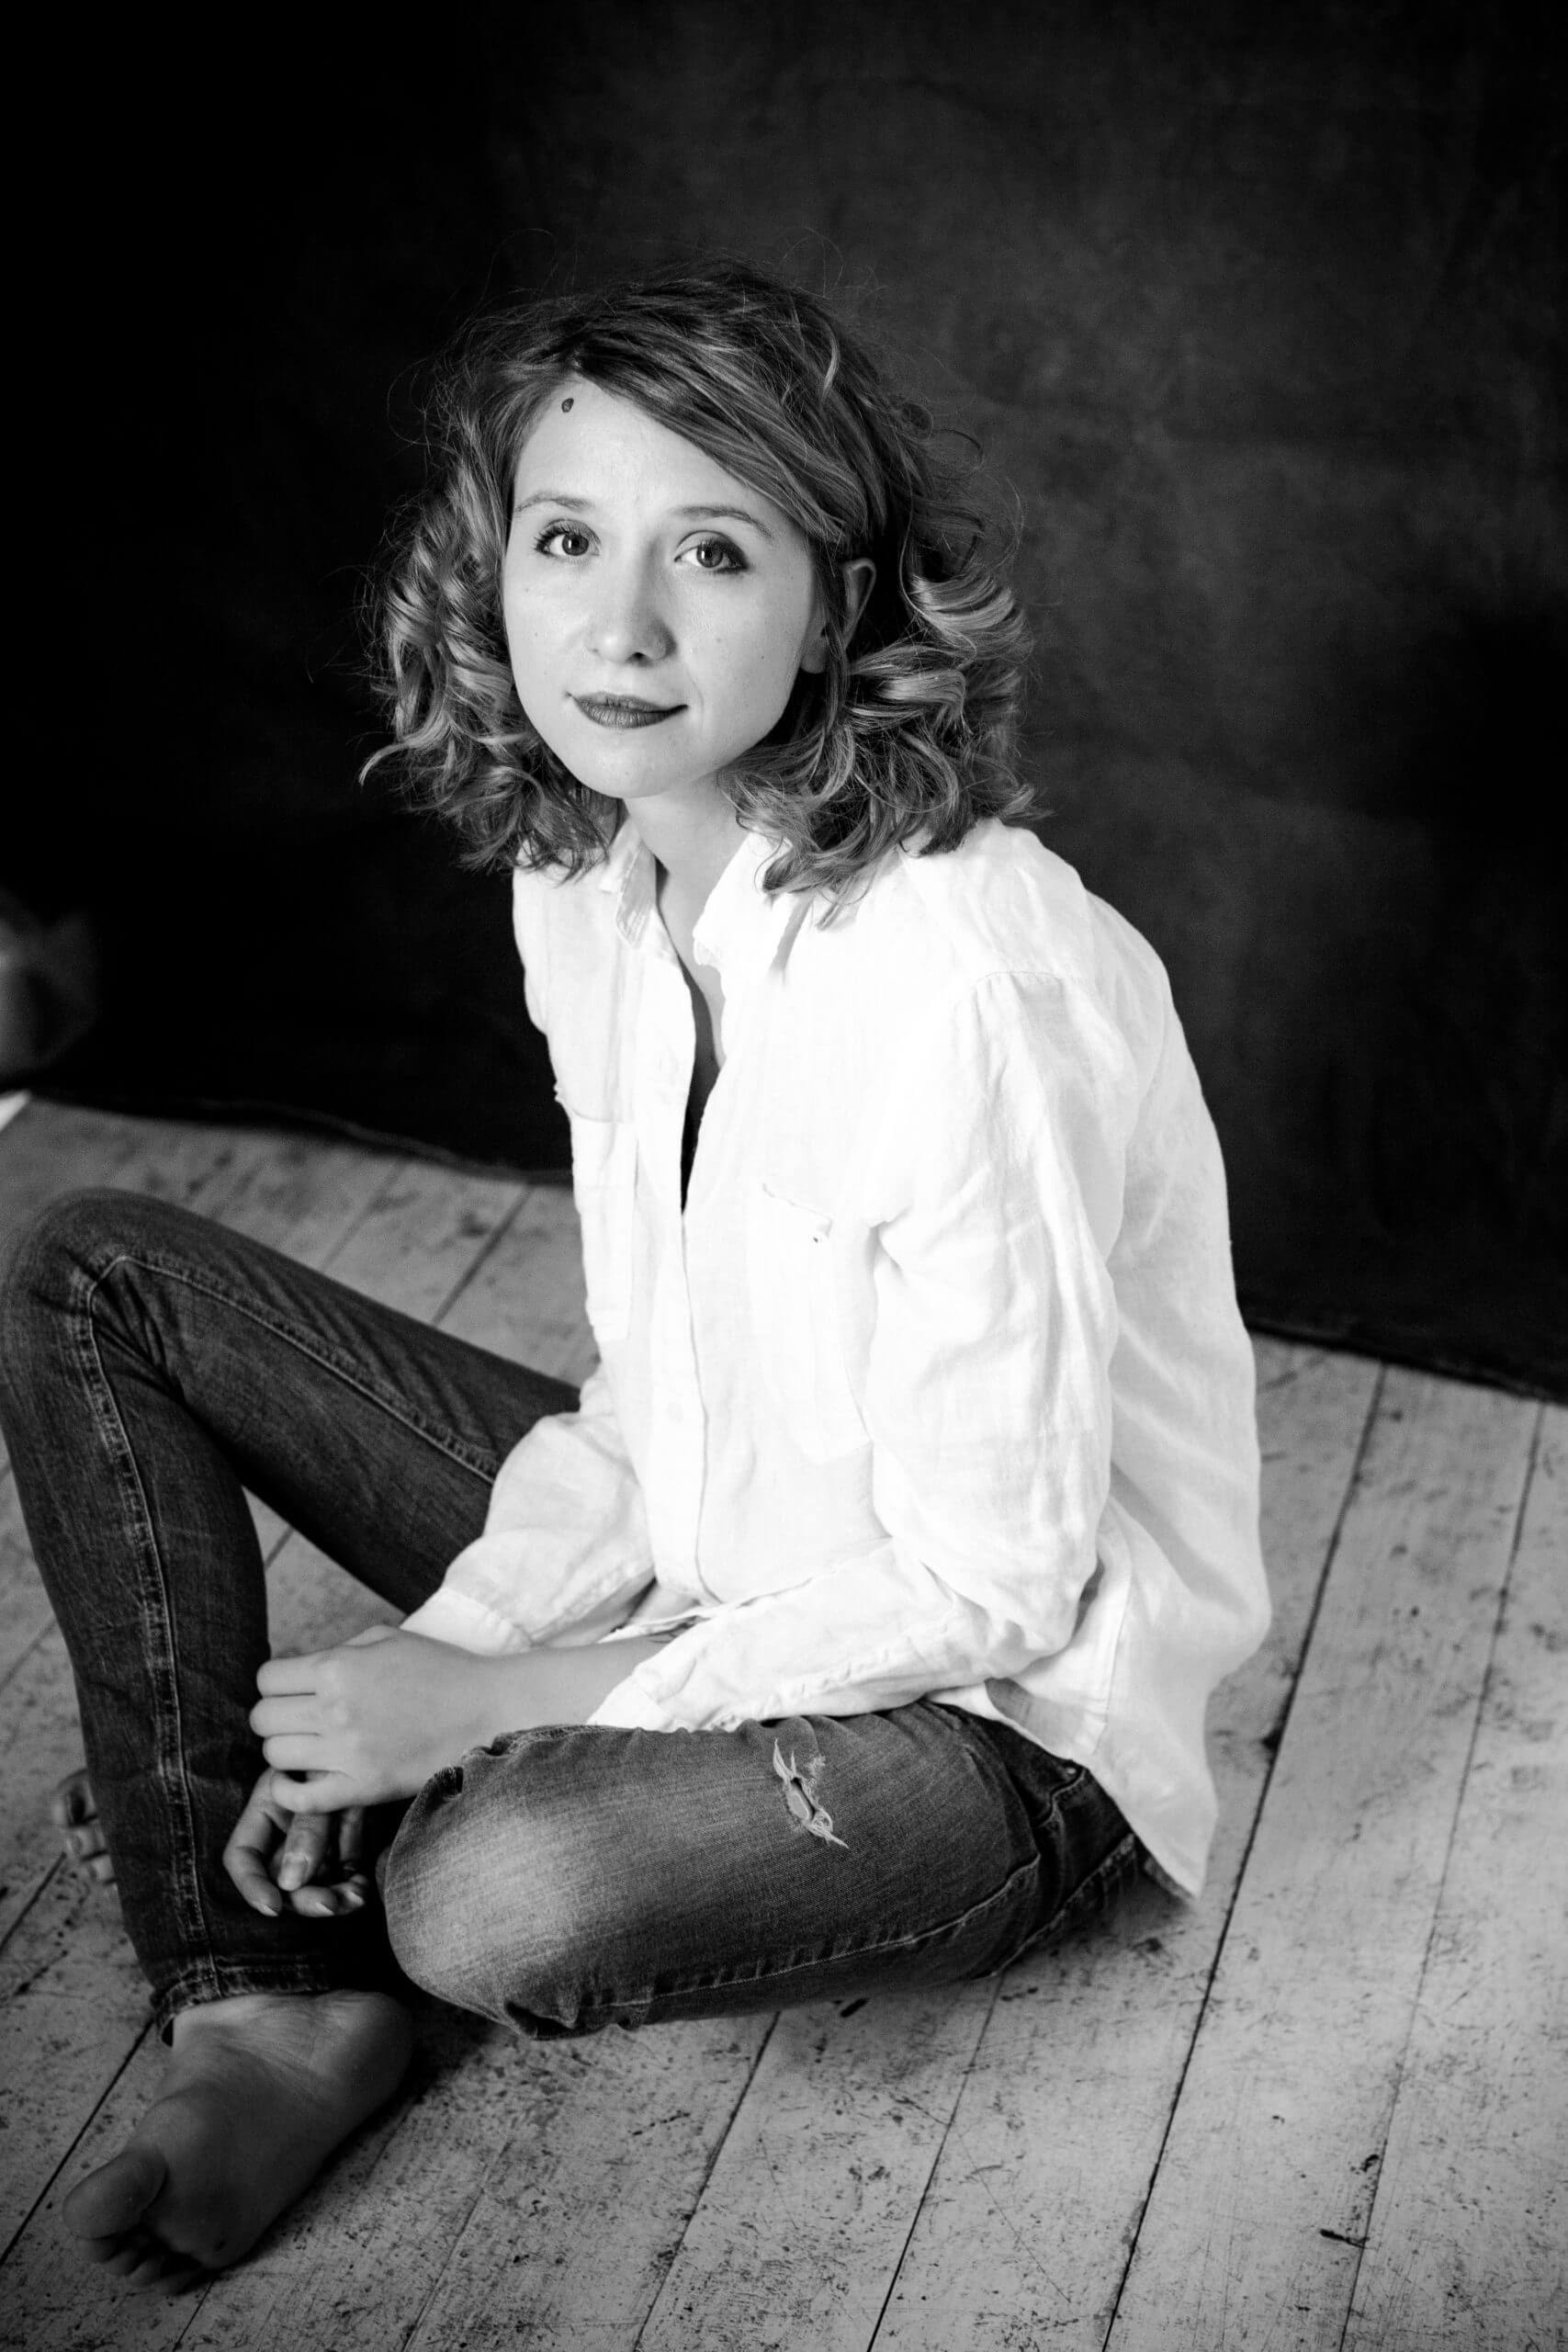 Alisa Kovalenko looking directly at the camera. She is sitting on a wooden floor and wearing denim trousers and a white shirt. Her shoulder-length hair is curly. Black and white portrait.